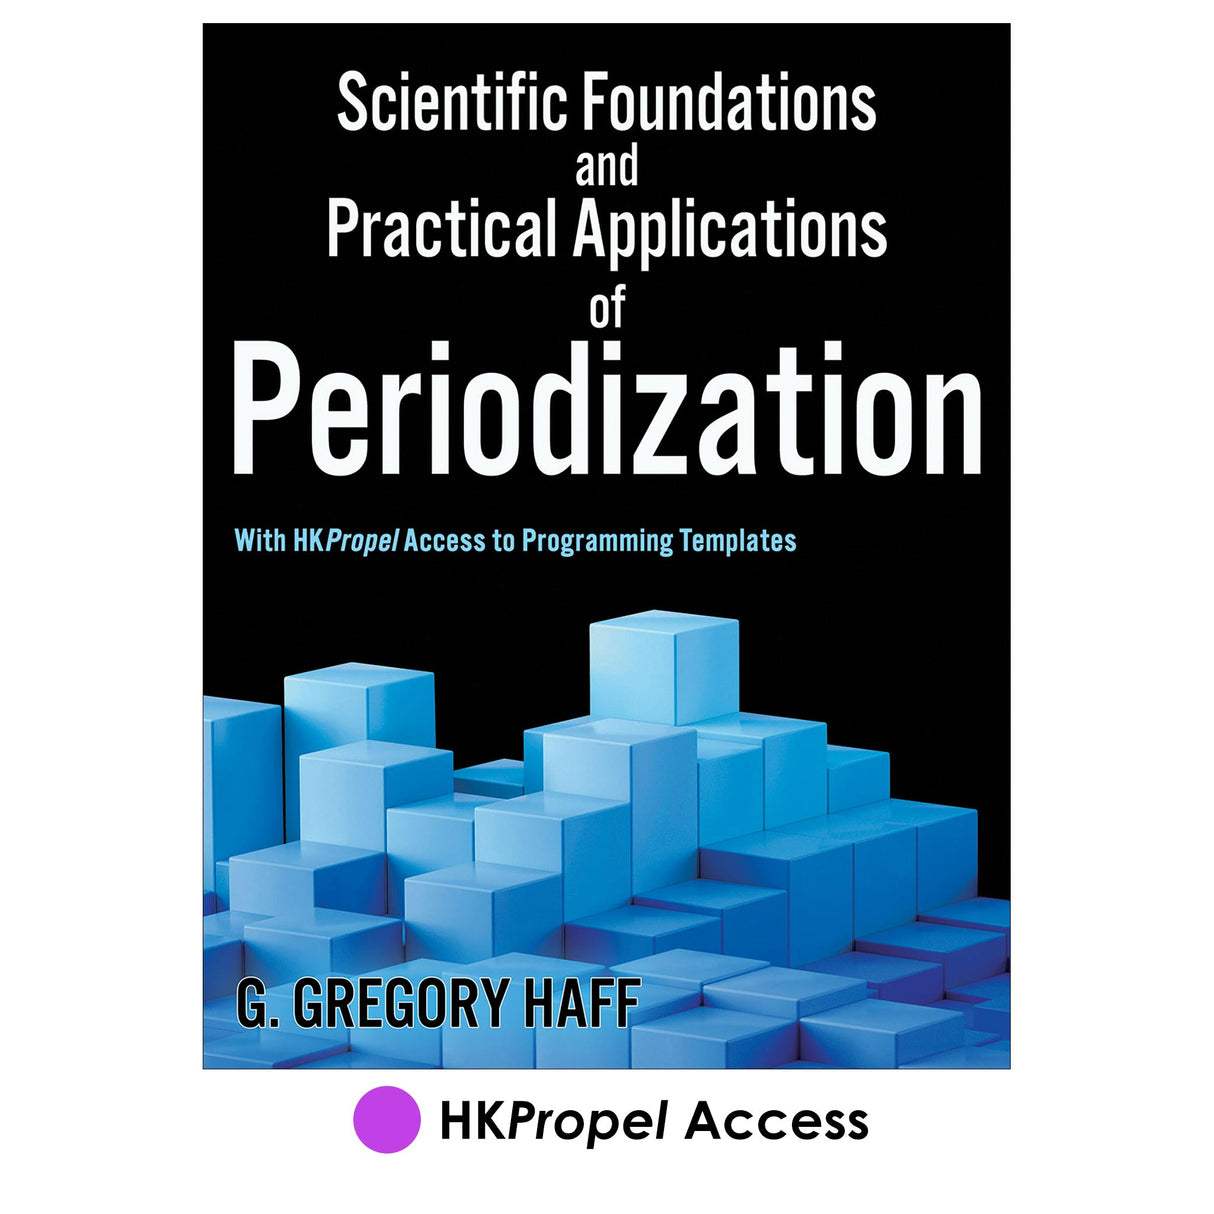 Scientific Foundations and Practical Applications of Periodization HKPropel Access